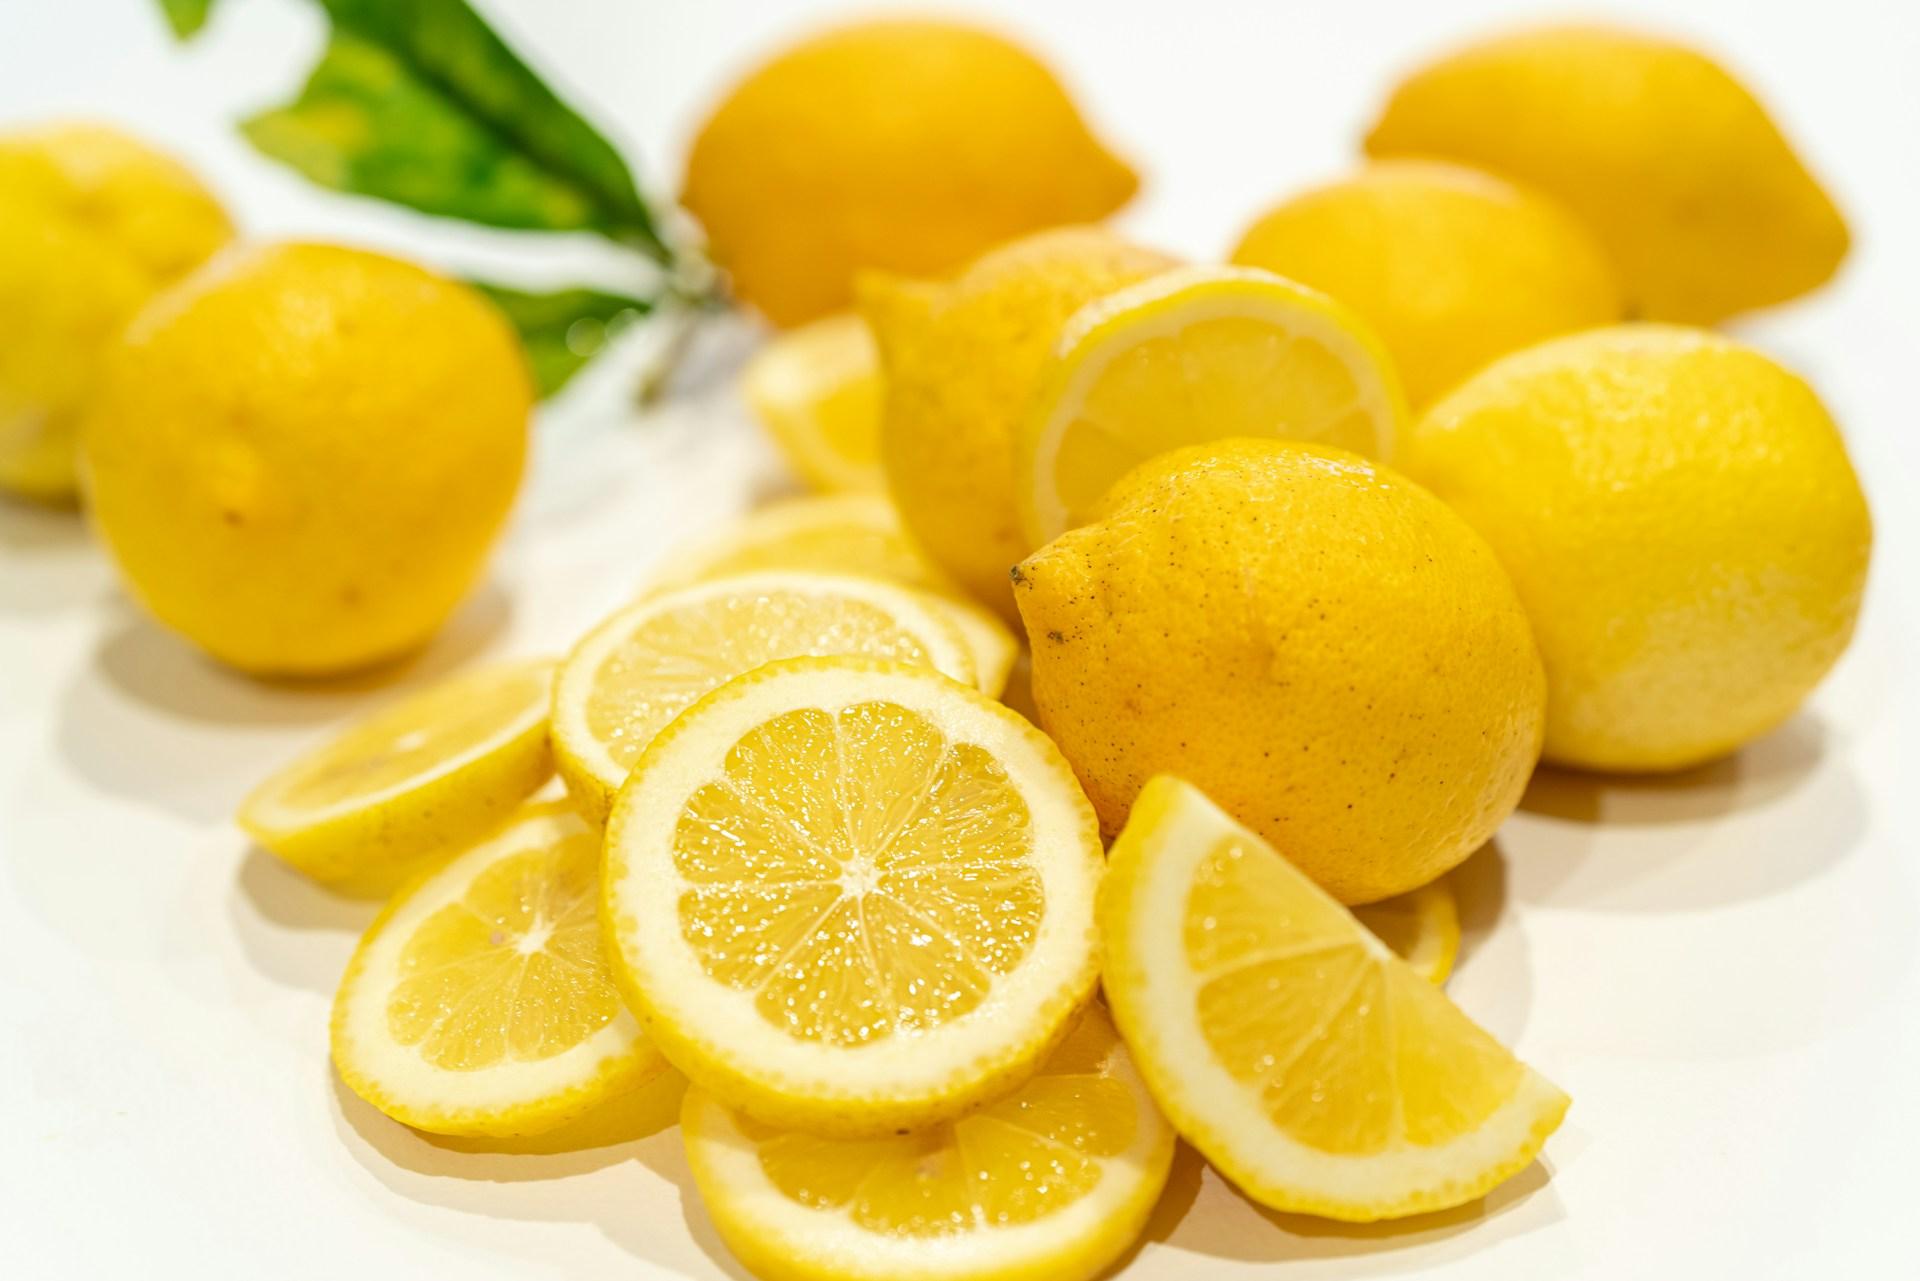 Lemon Hacks To Use In Your Home